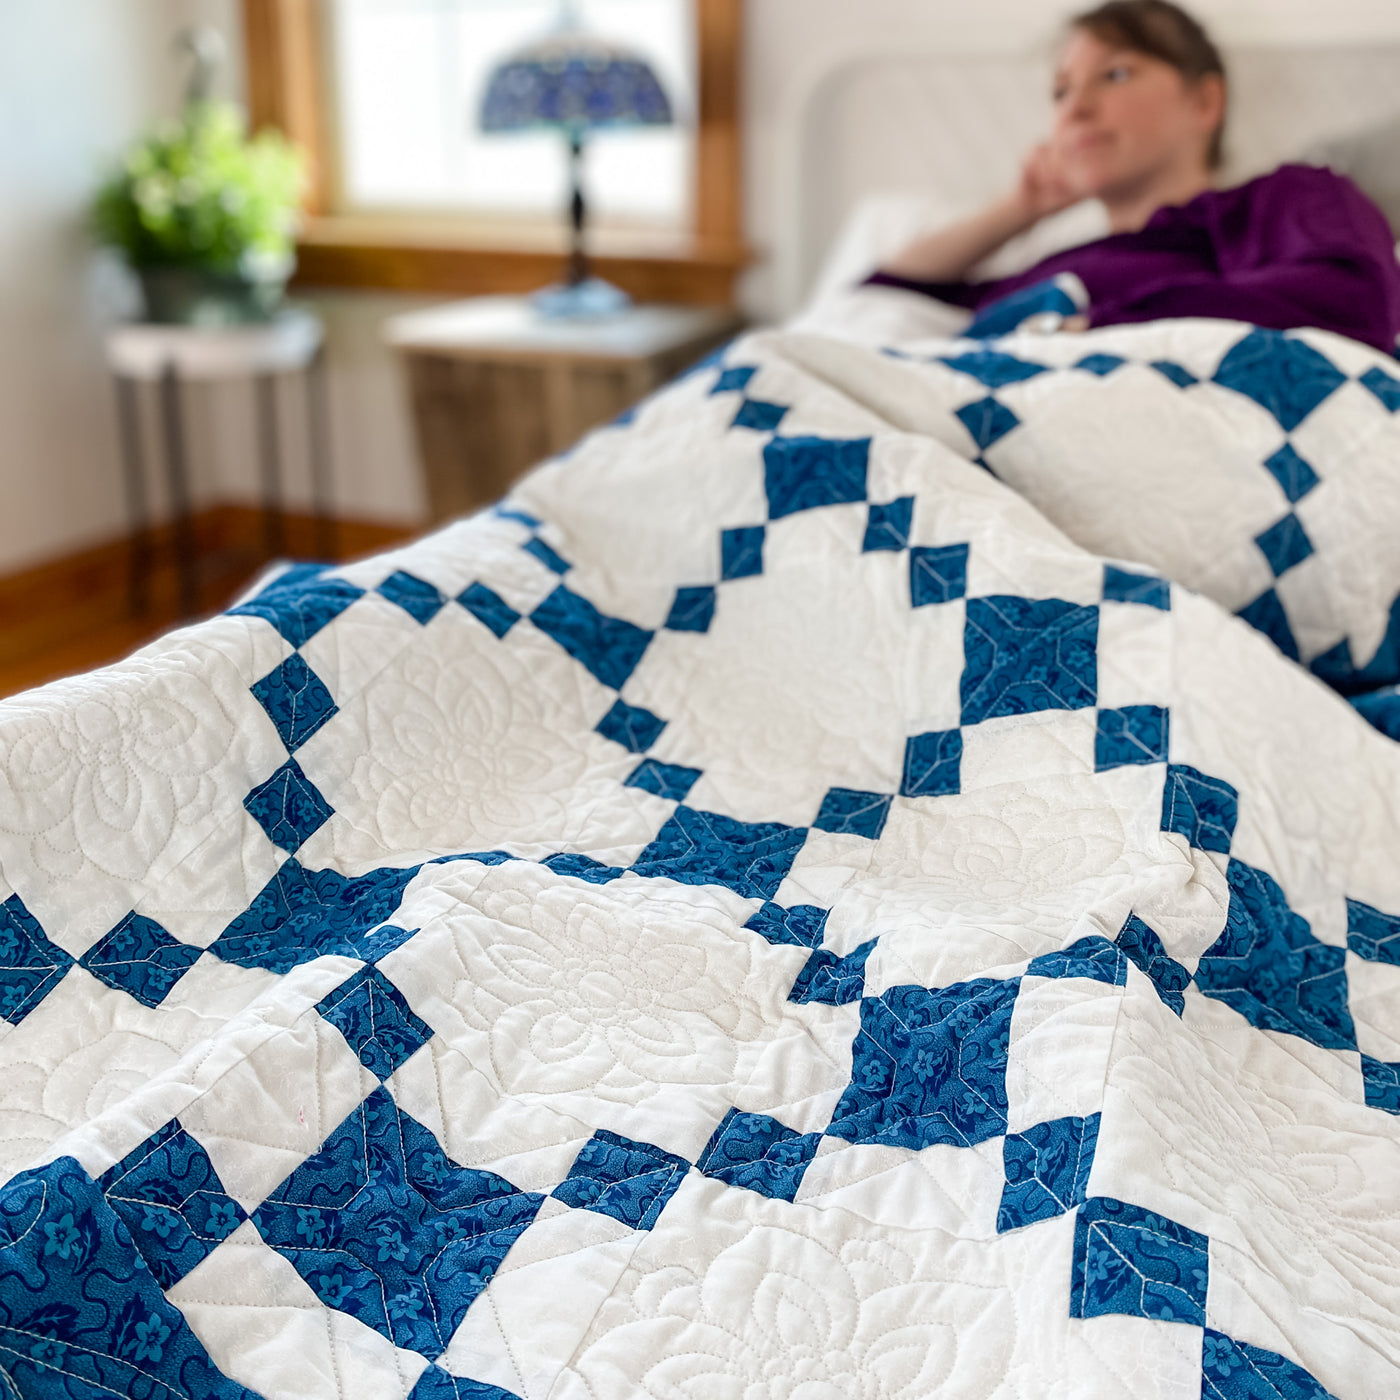 A girl on a bed with a handmade, heirloom, patchwork of indigo/blue nine patch with white background fabric, natural color backing, 100% cotton batting, Floral top quilting in the white centers, X's in the 9 patch squares, and feathers along the borders, machine top stitched binding, on this baby size quilt